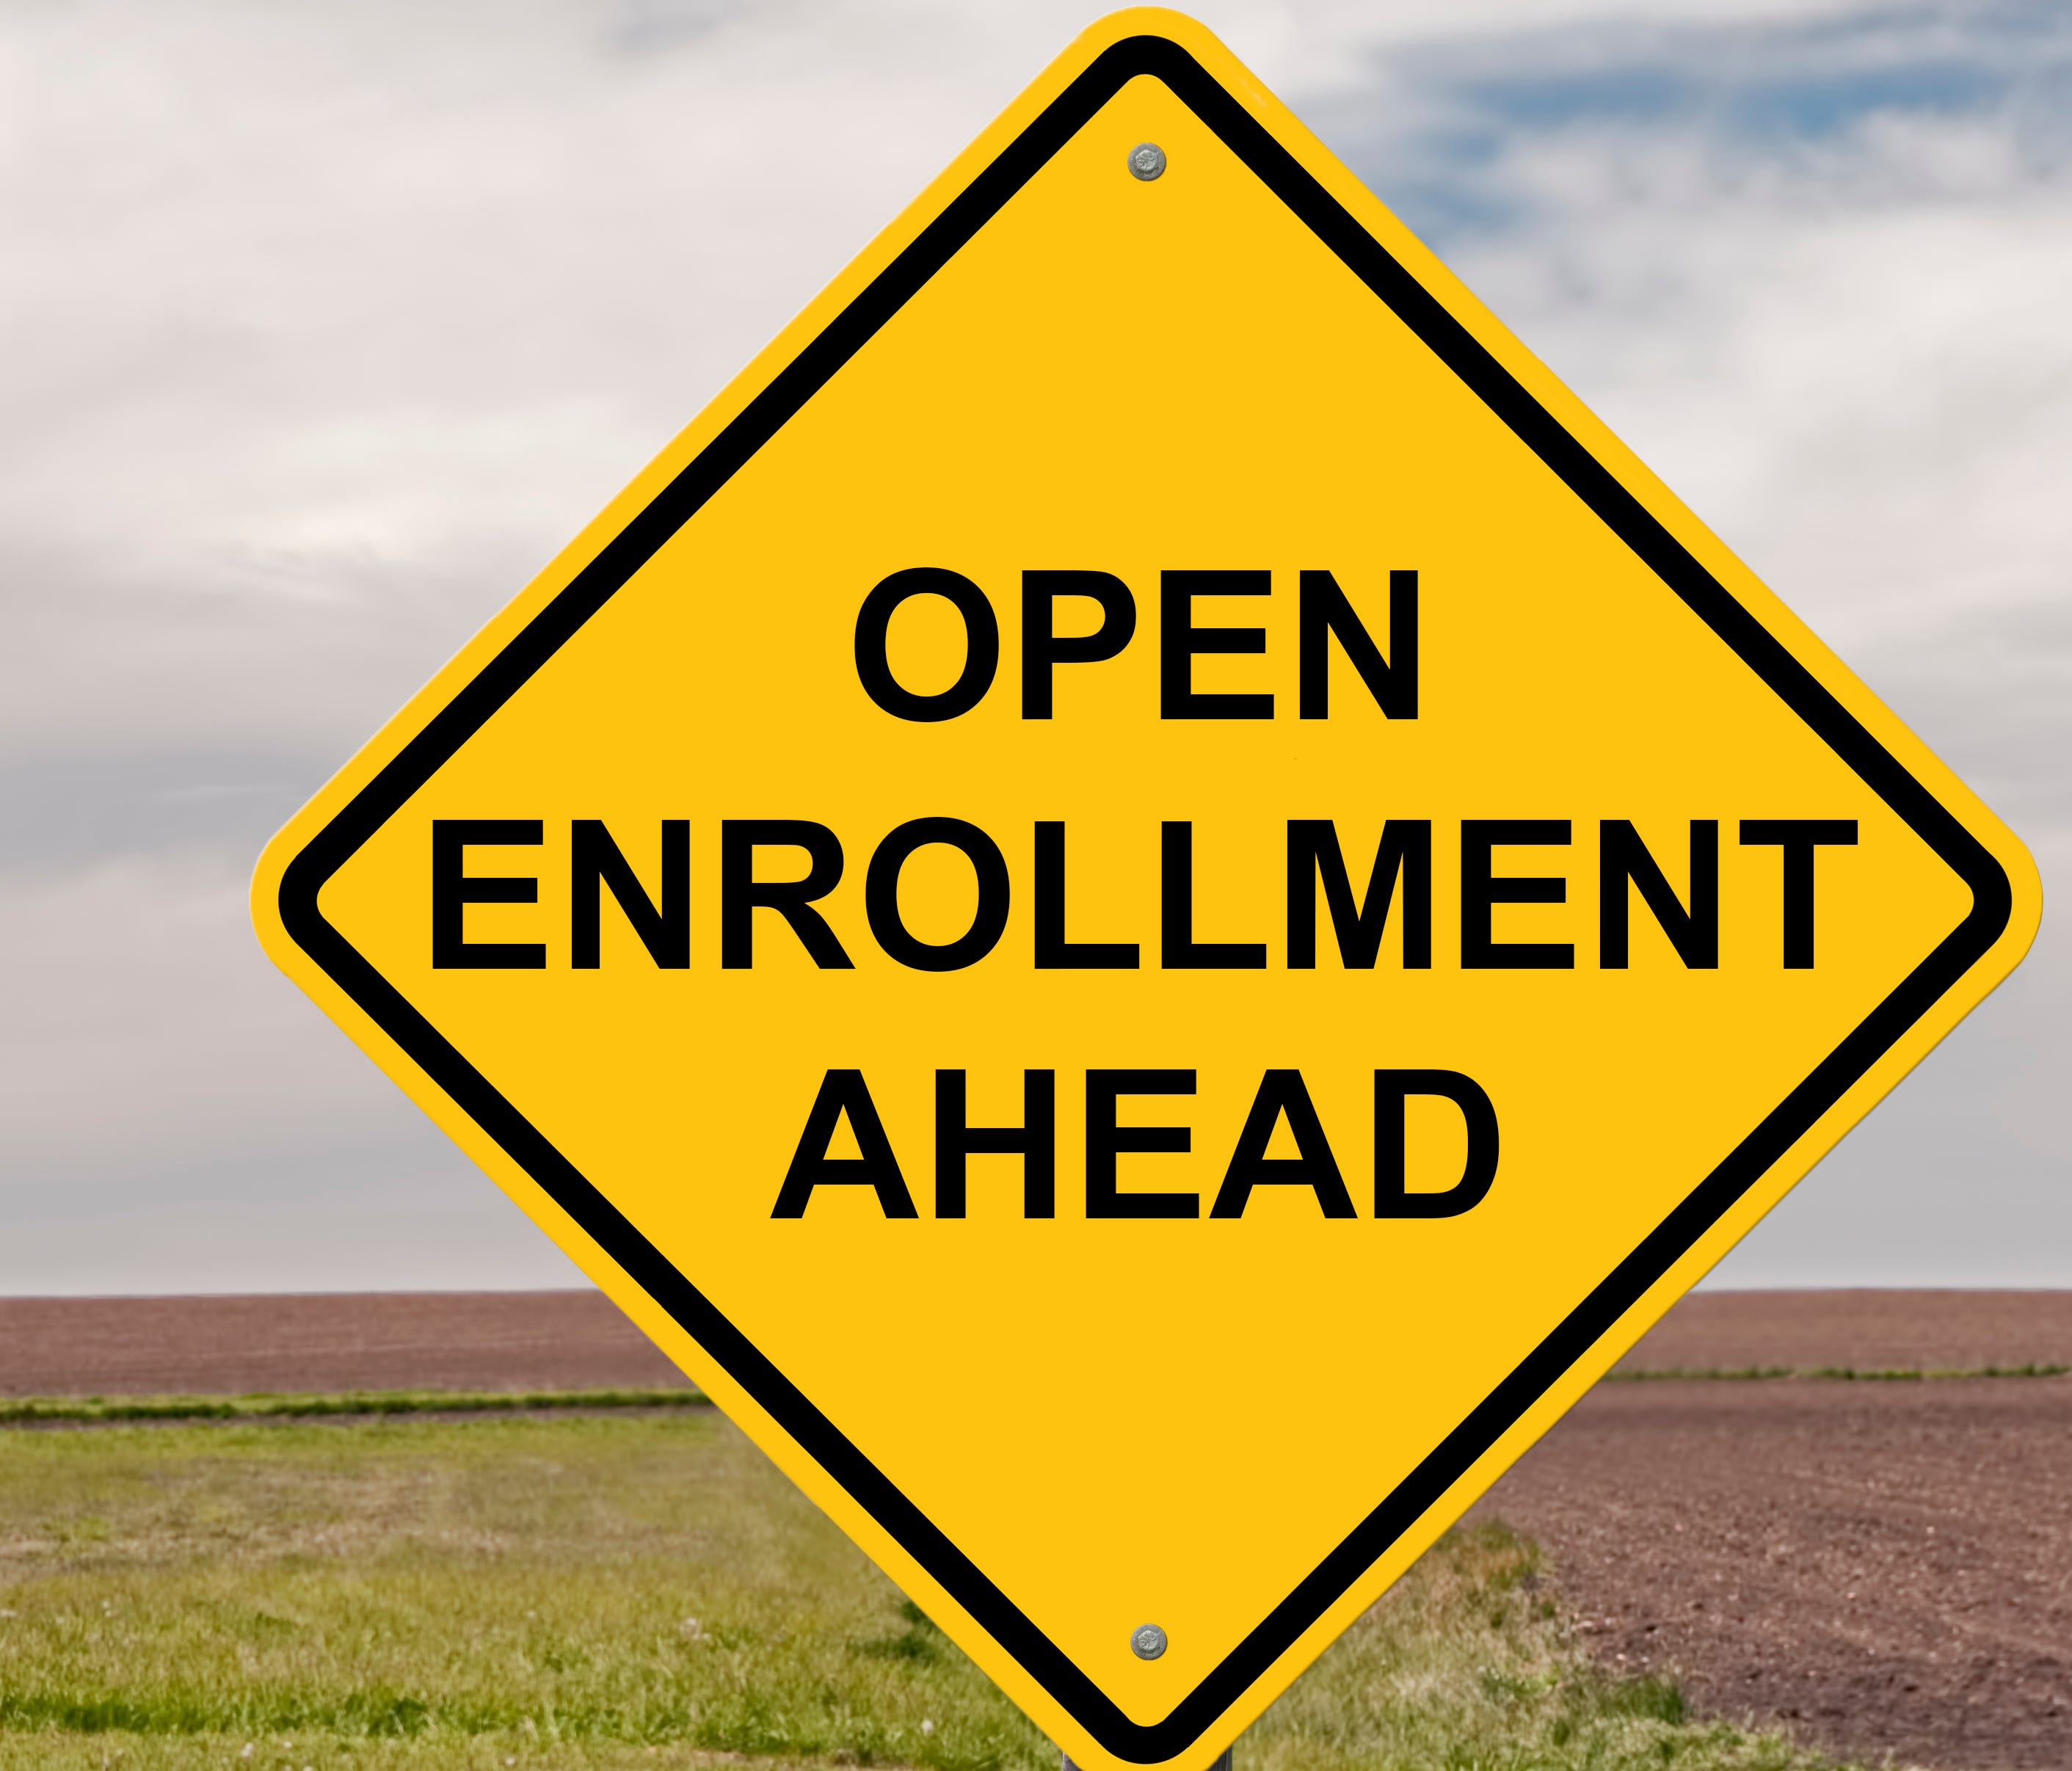 The open enrollment period to make changes to your Medicare plans runs from Oct. 15-Dec. 7.